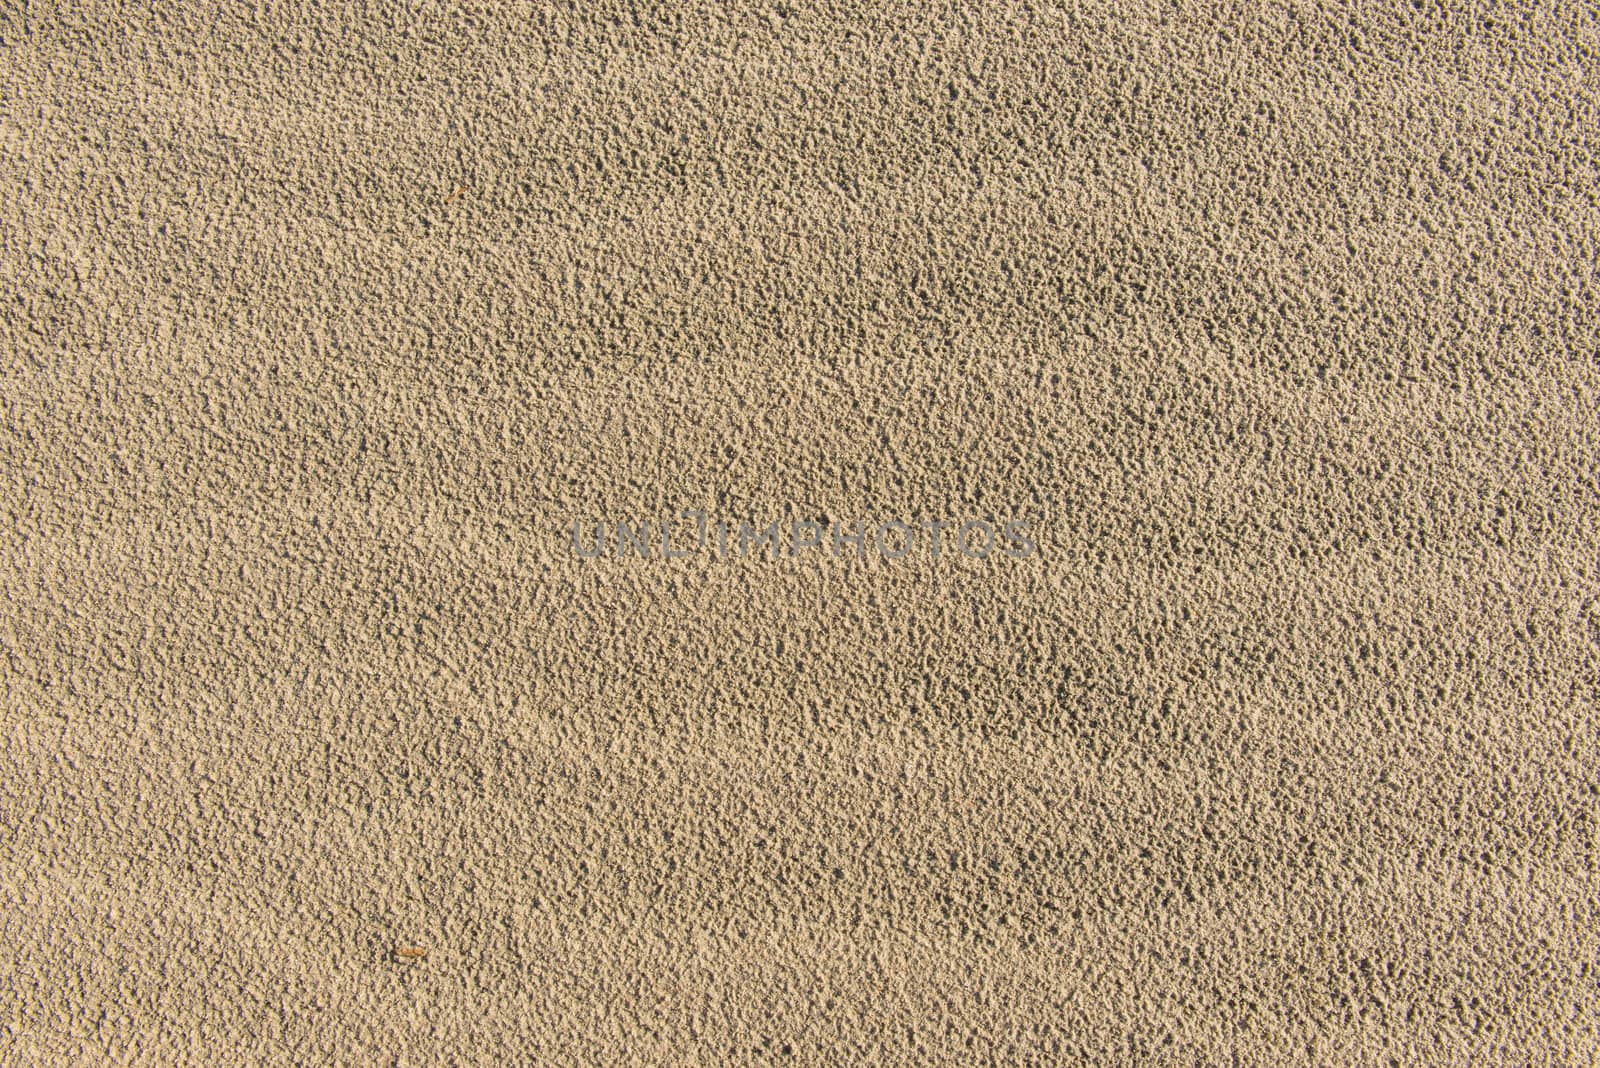 Sand texture at the beach with copy space.